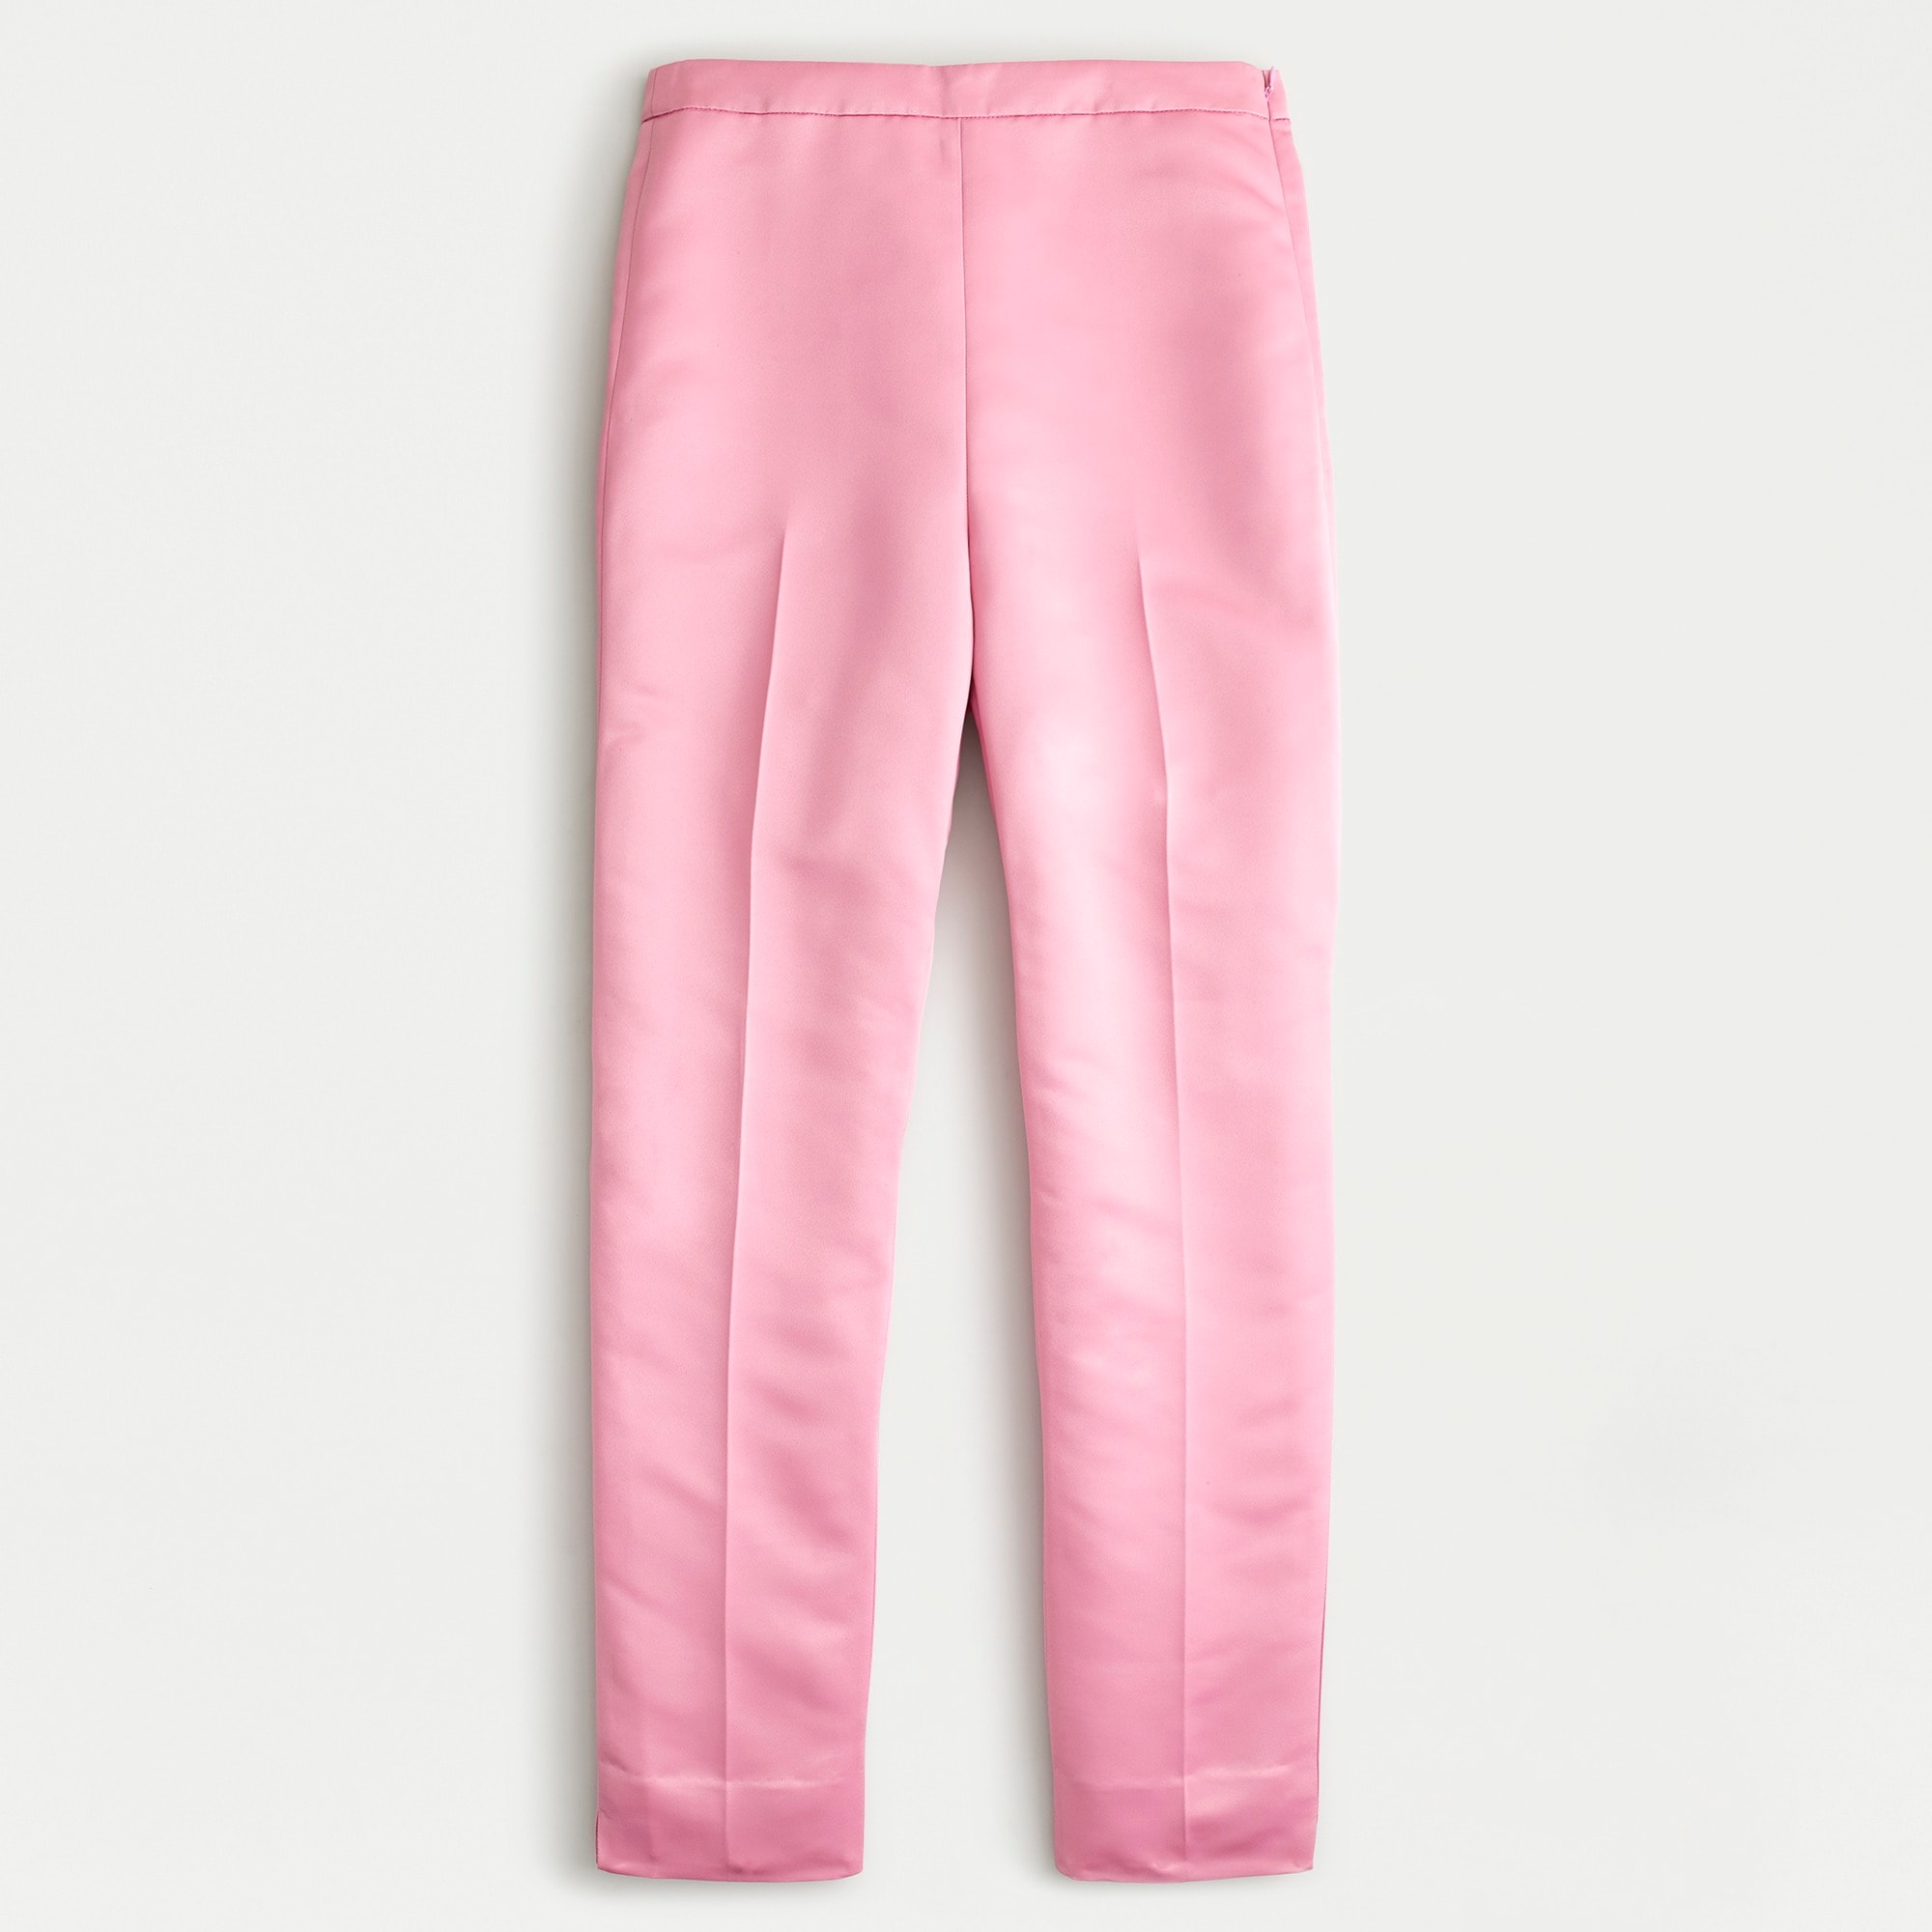 High-rise Satin In Women Cigarette J.Crew: For Pant